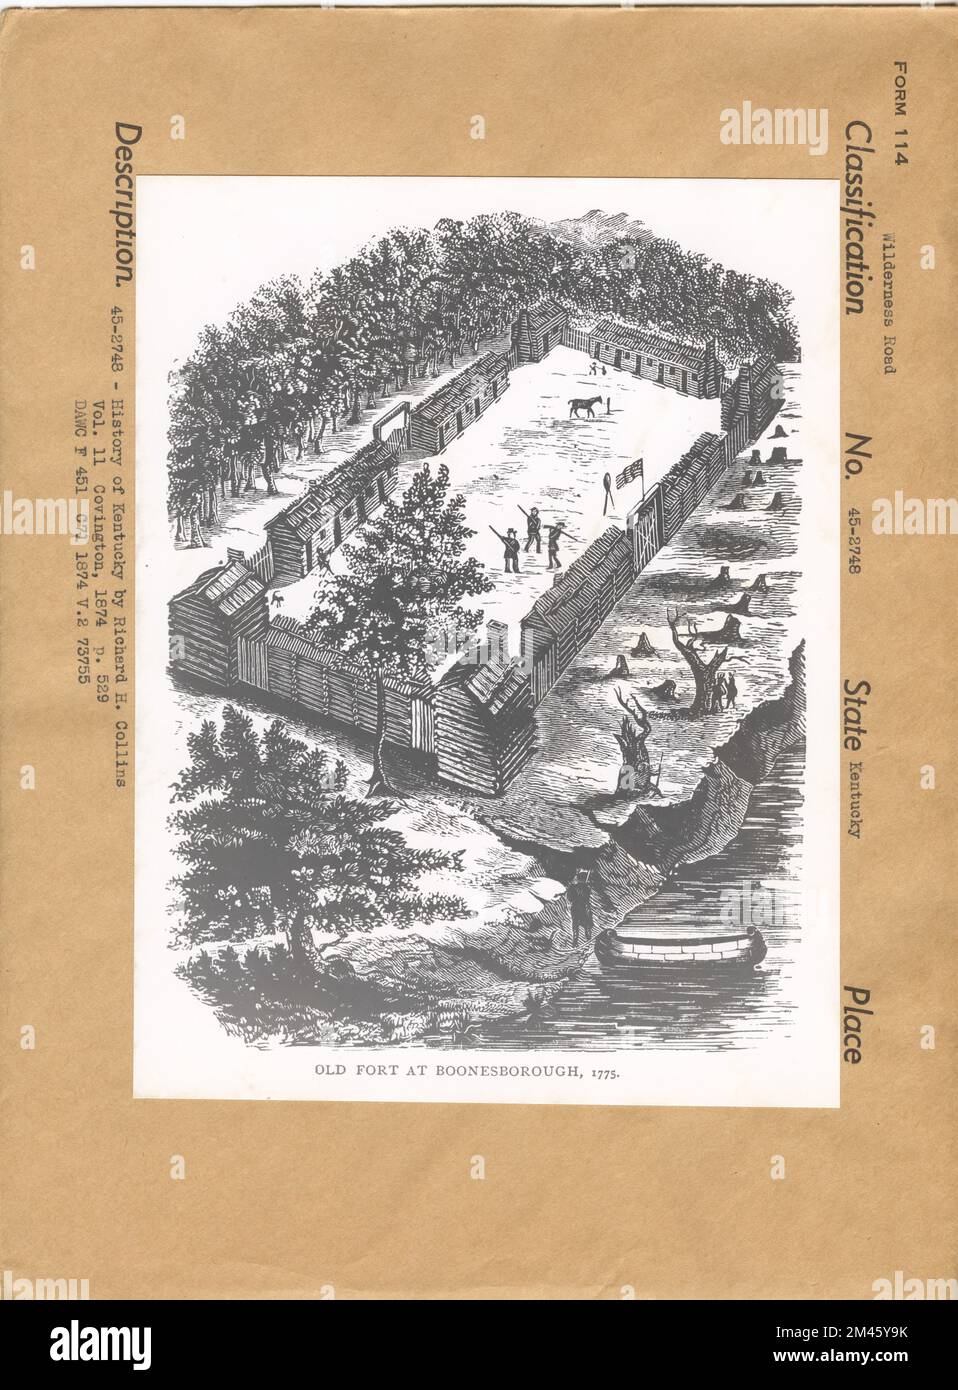 Old Fort at Boonesborough, 1775. Original caption: 45-2748 - History of Kentucky by Richard H. Collins. Vol. 11 Covington 1874 p. 529. Stock Photo